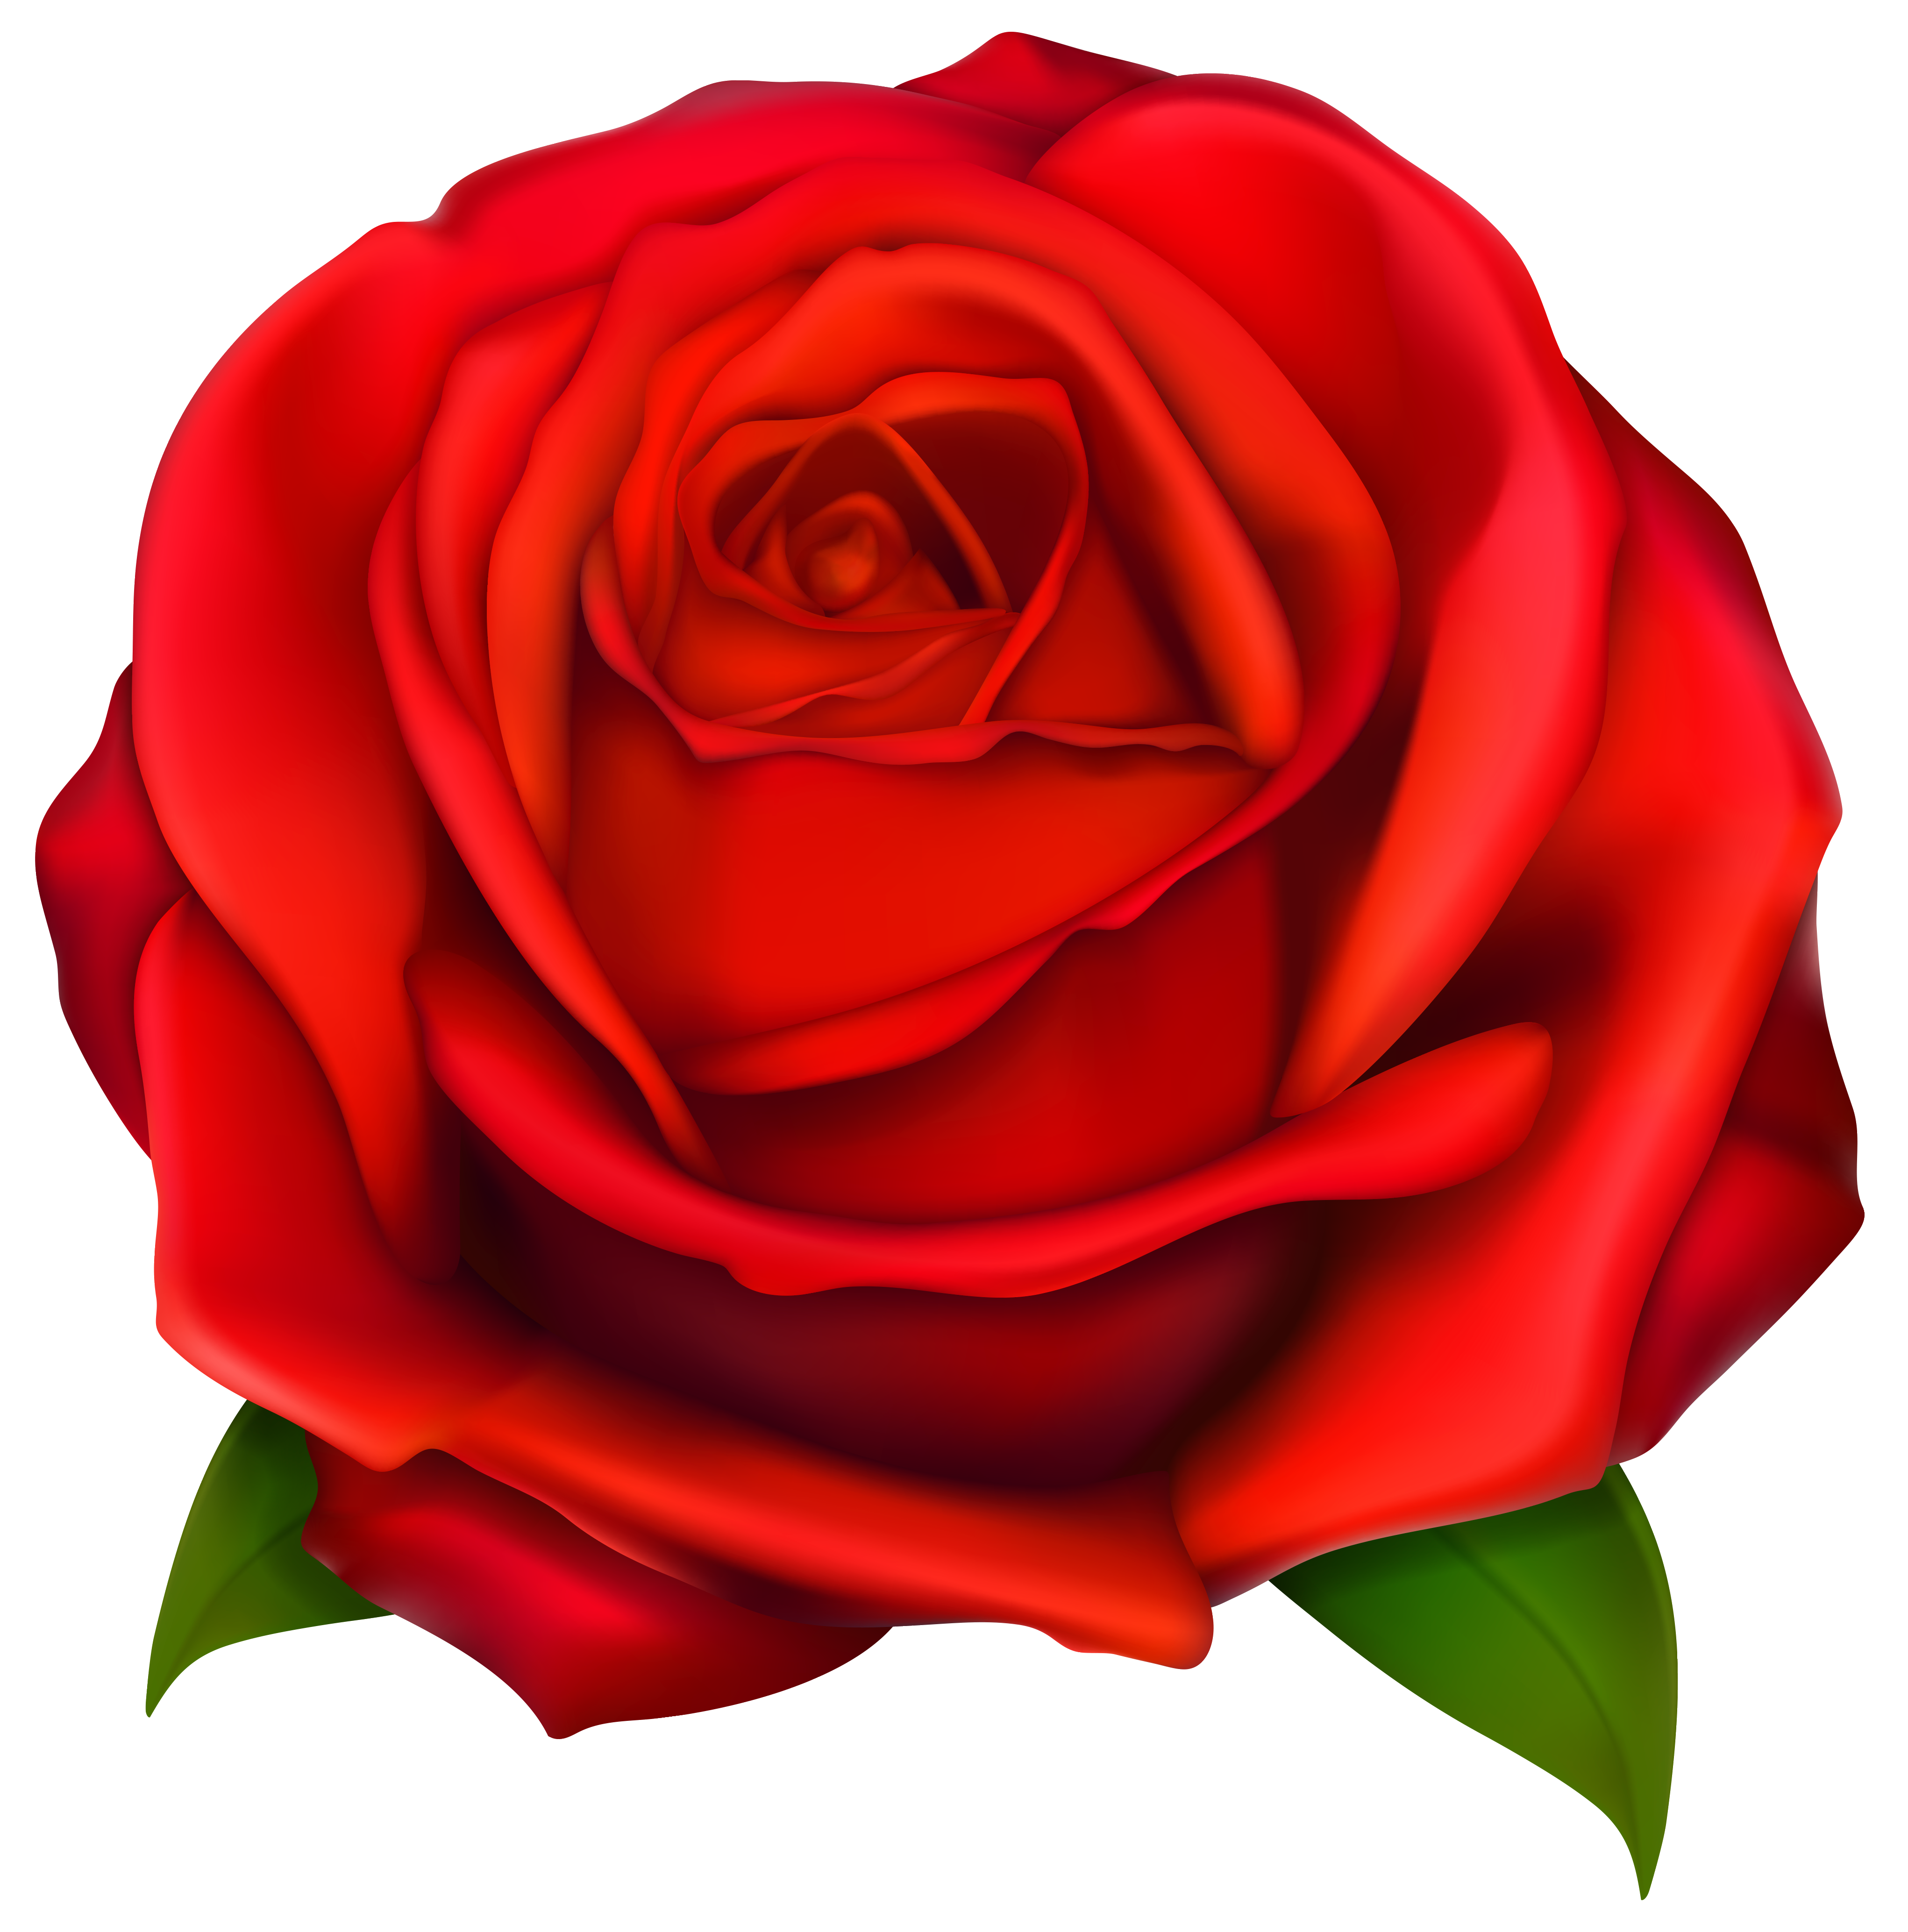 Image of clip art red rose 2 red roses clip art images free